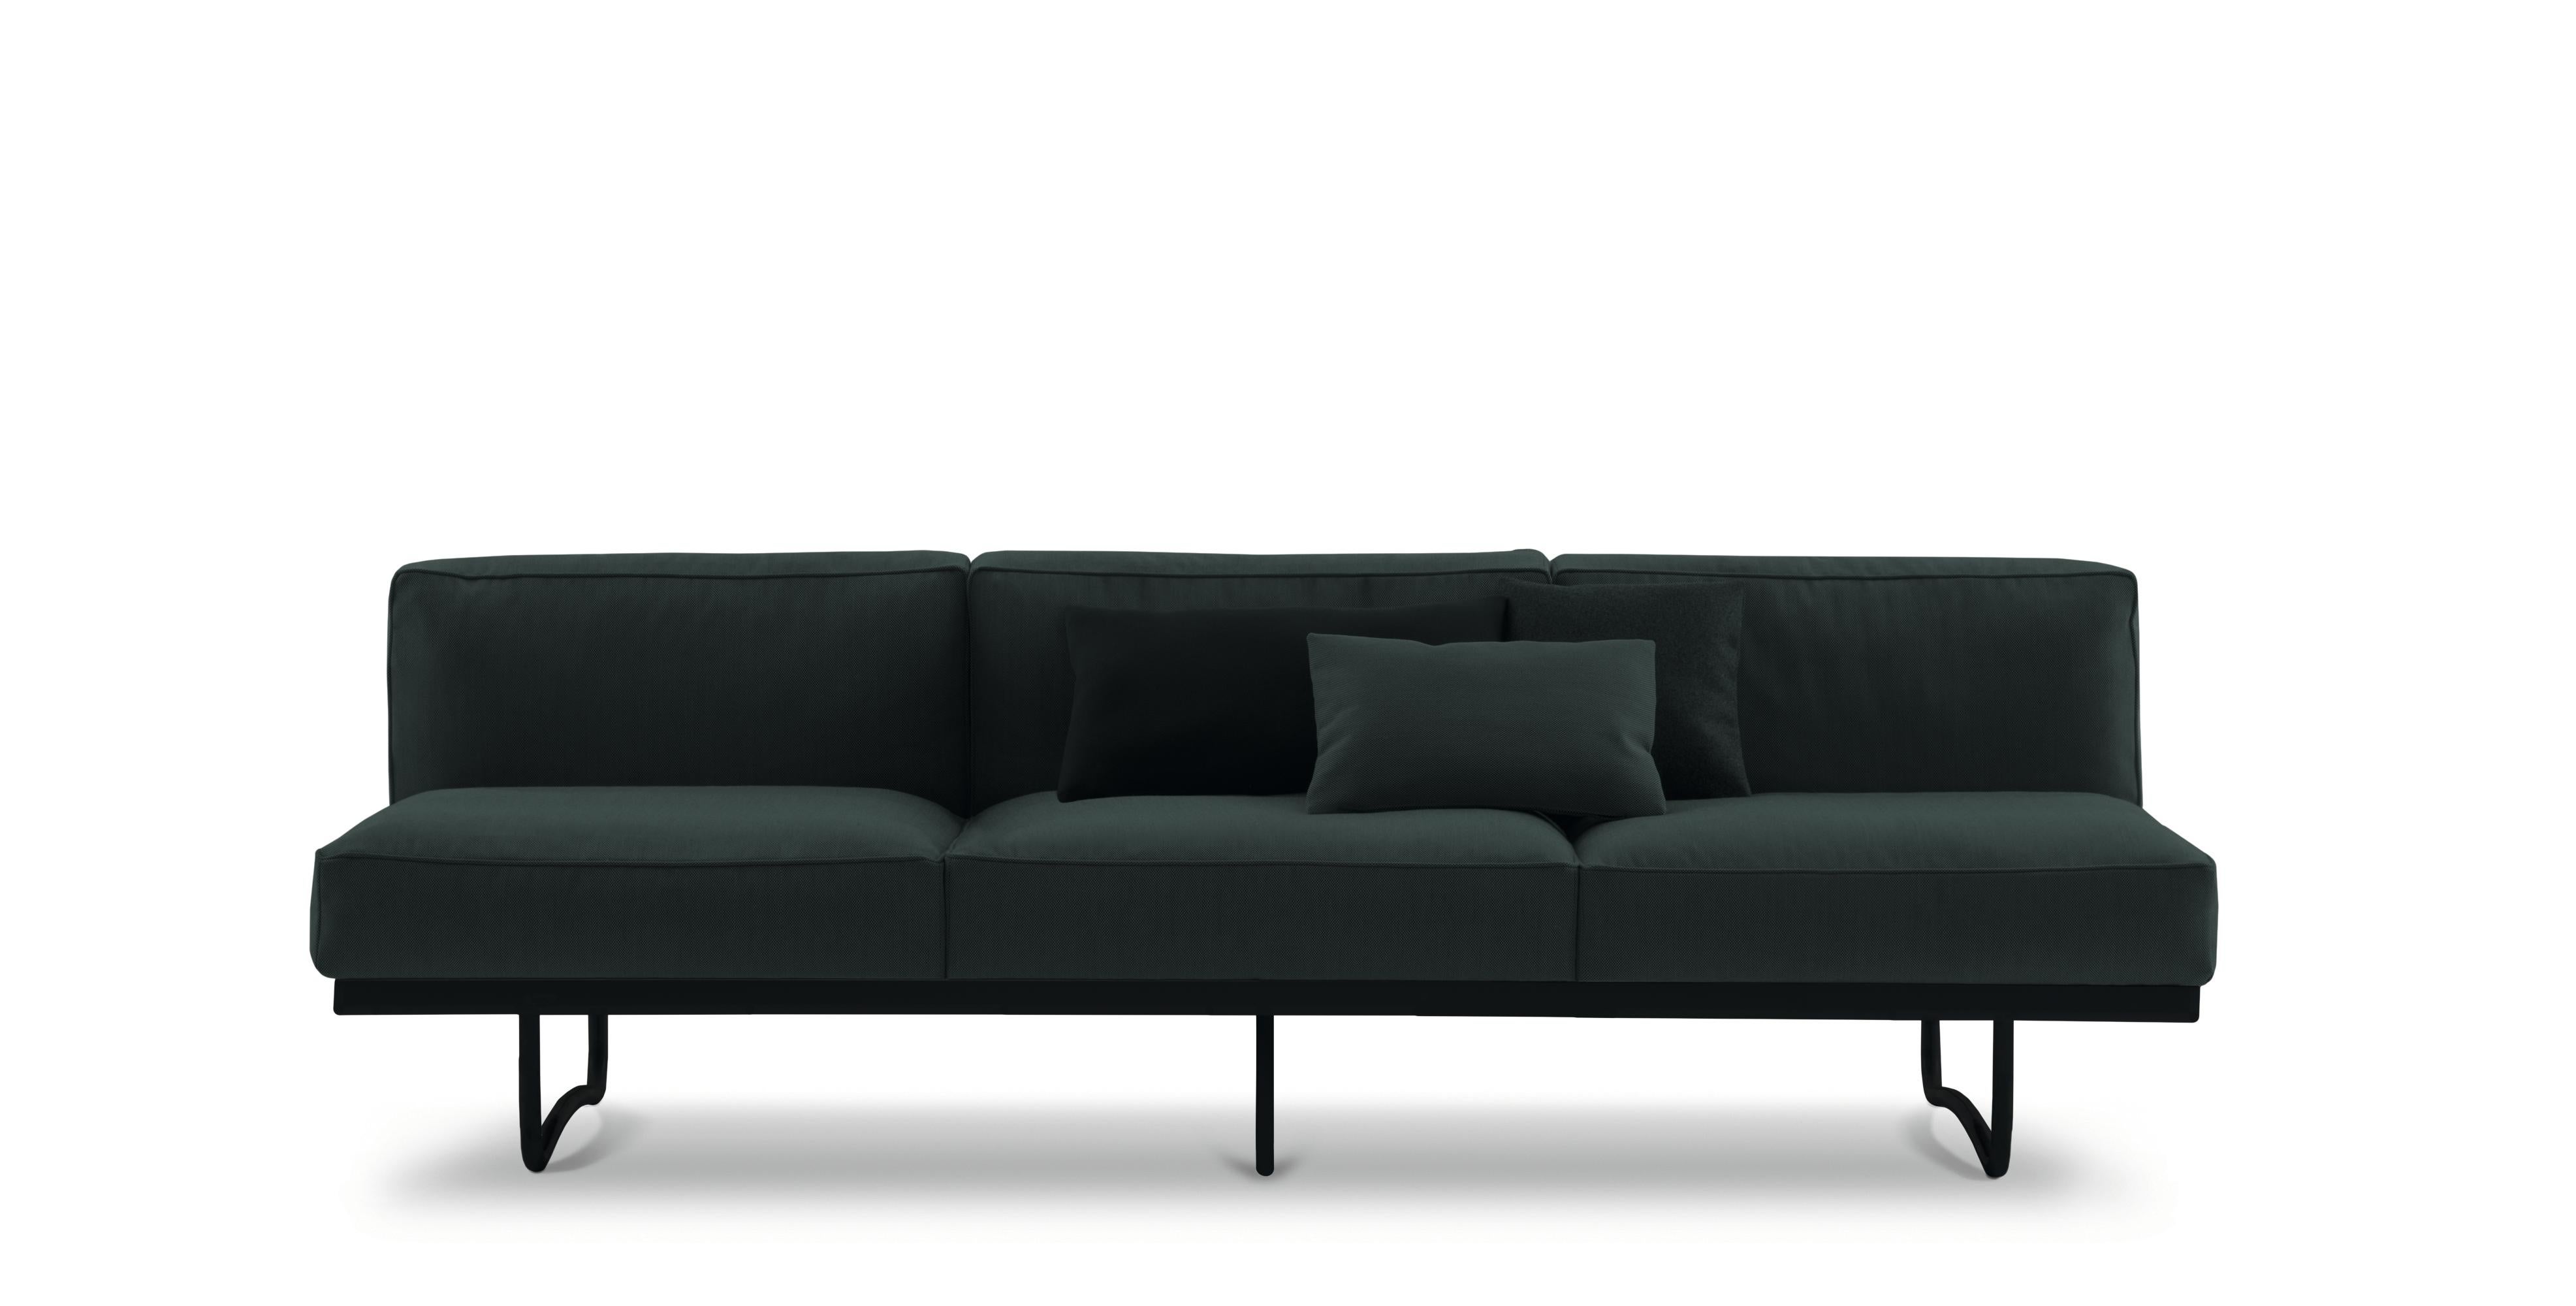 The price given applies to the item as seen on the first photo. Prices vary dependent on the chosen material/color. Available in fabric or leather. 

Contemporary and comfortable lines for this sofa that was designed by Le Corbusier for his Paris